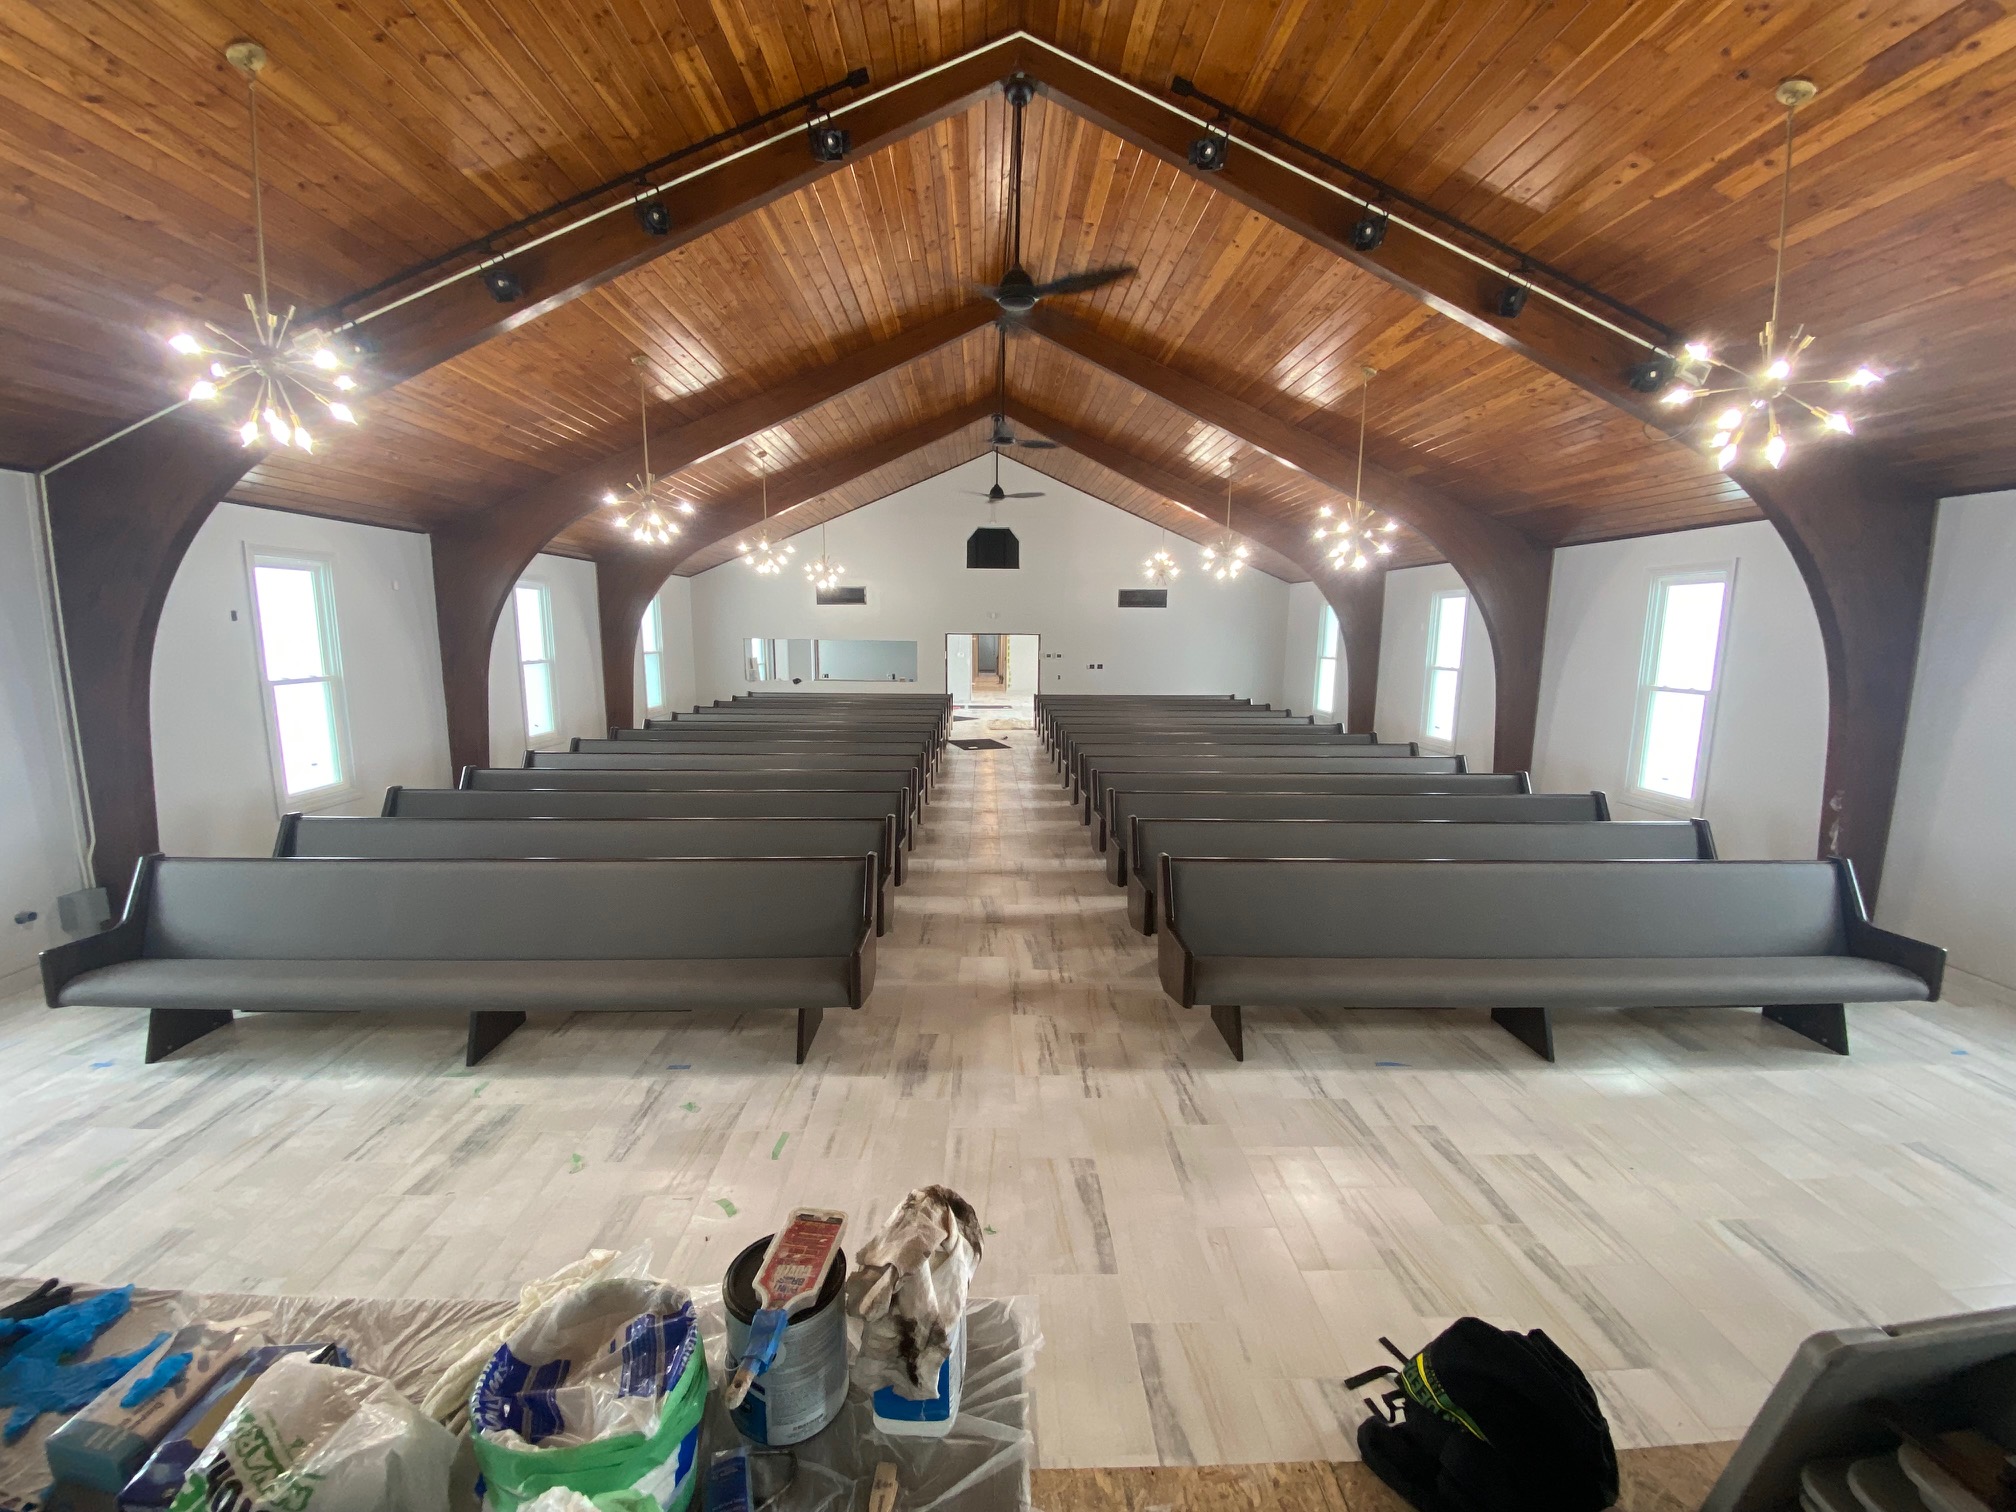 New Church pews installed by Woods Church Interiors at Believers Chapel in Warren, Ohio - 8